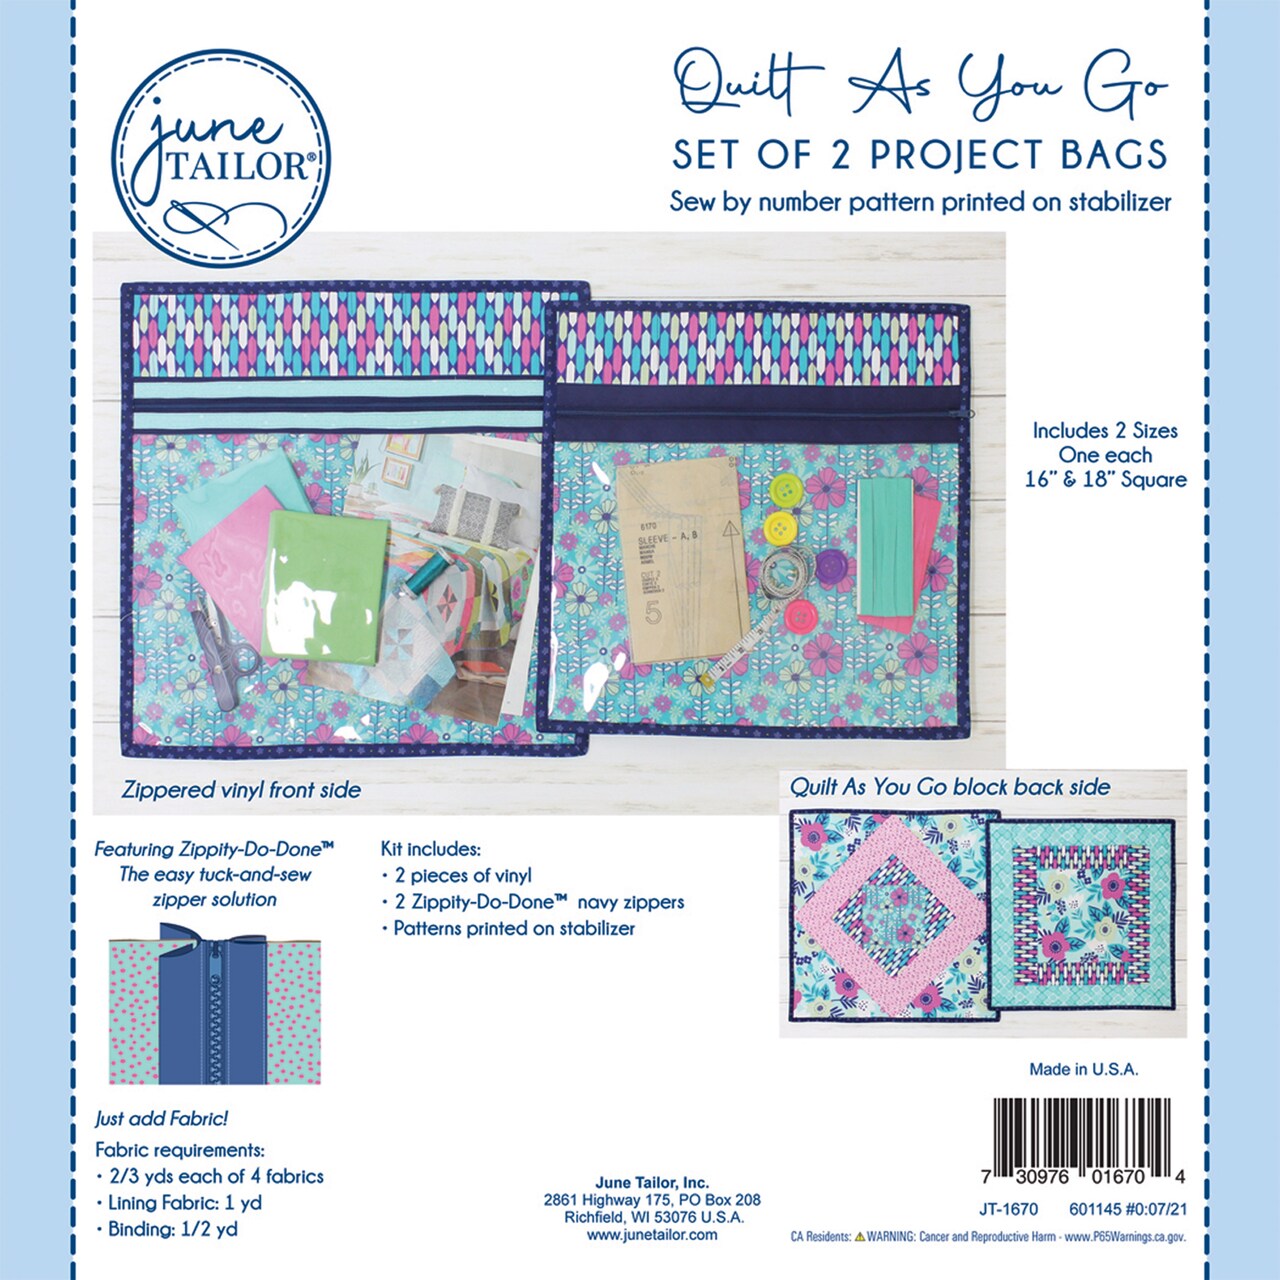 June Tailor Quilt As You Go Project Bag Kit-Navy Zippity-Do-Done(Tm)